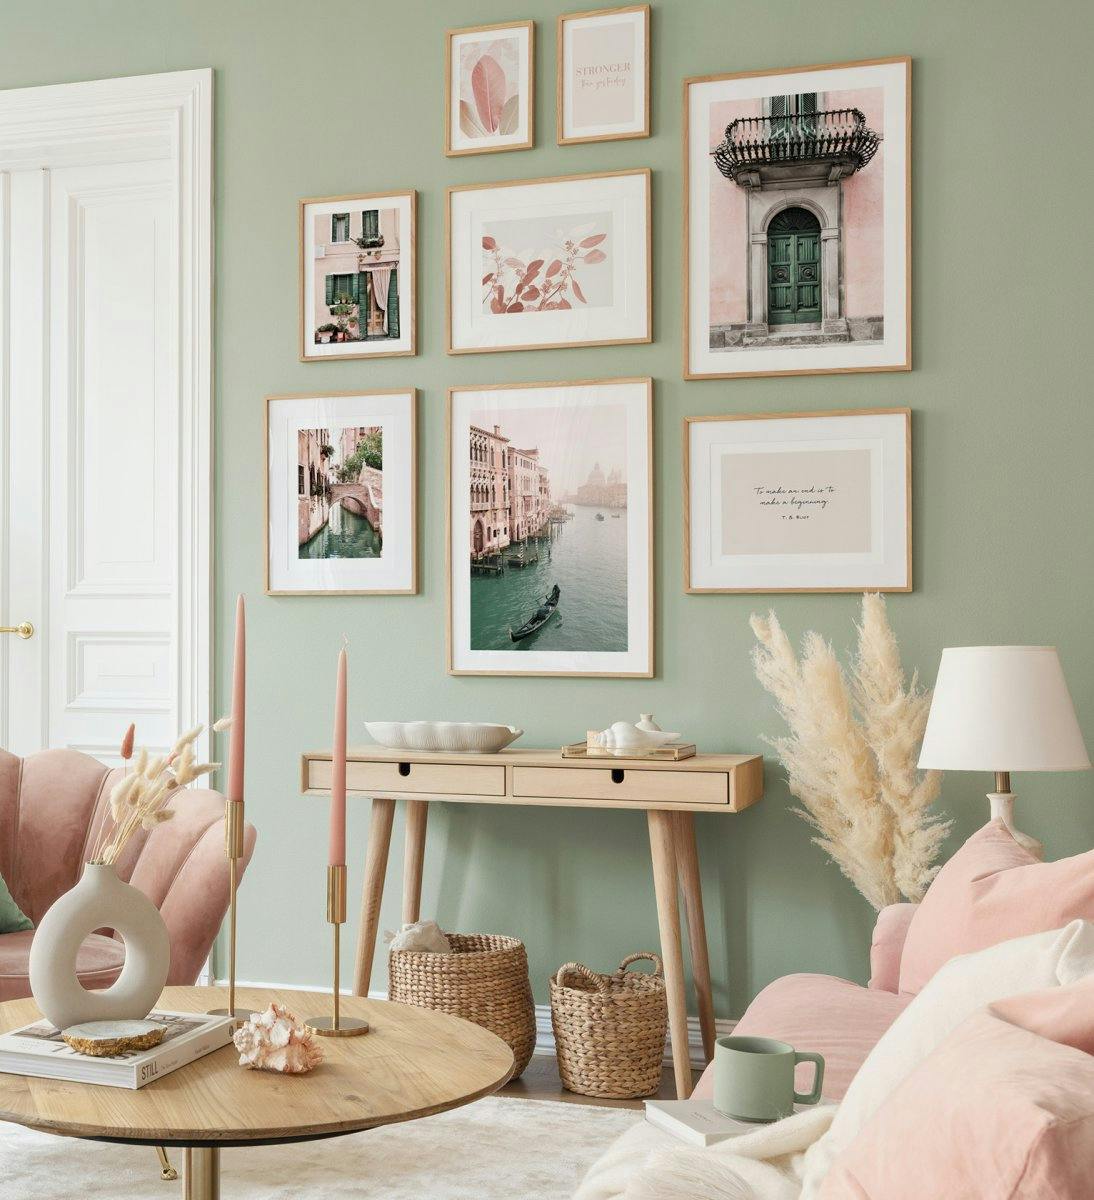 Photographs in pastel colours create a playful and fresh vibe in the living room